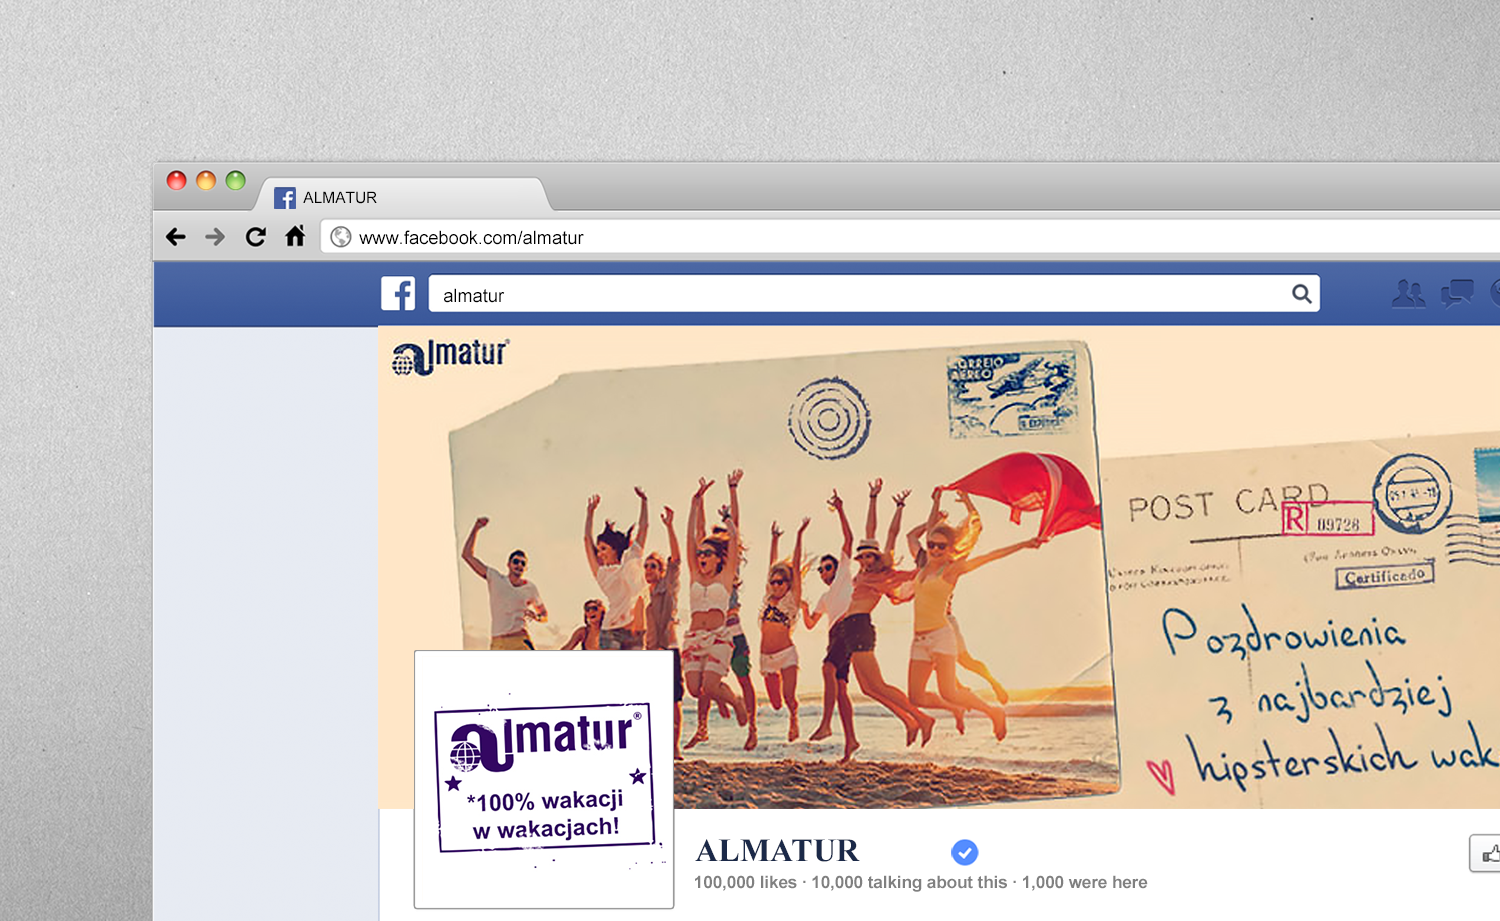 Almatur promotes their themed youth camps offer on Facebook